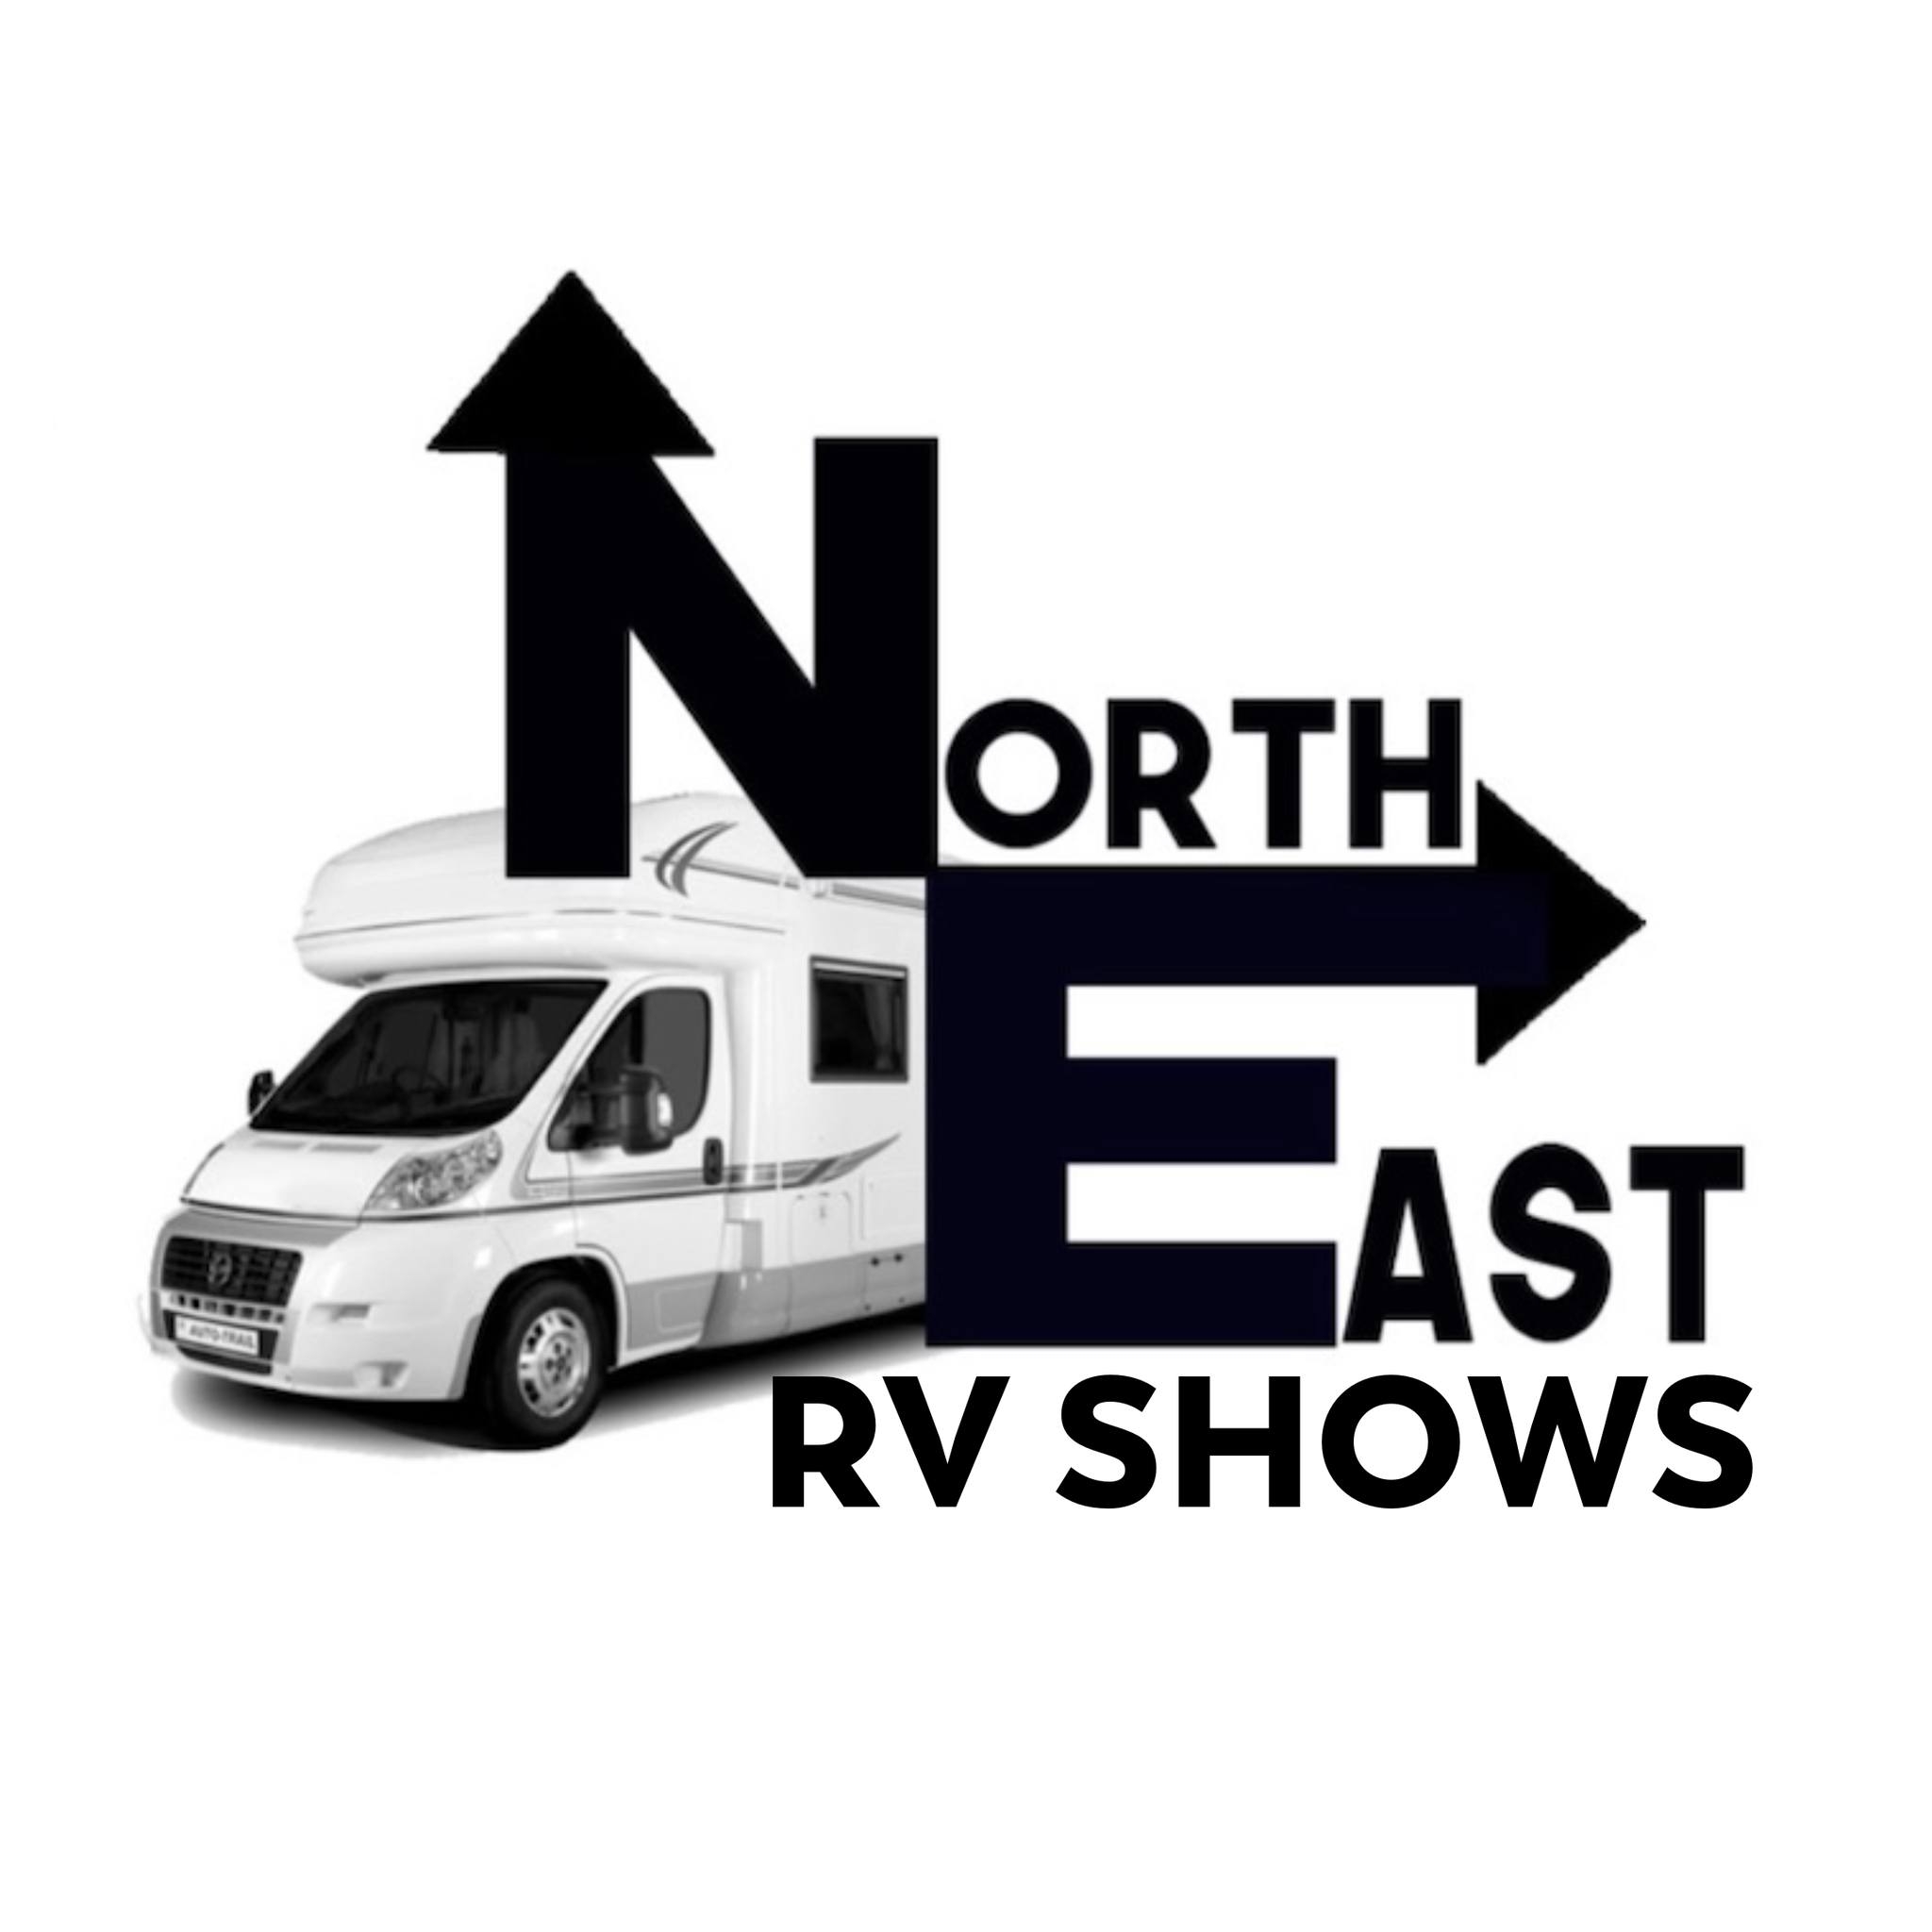 41st Northeast RV & Camping Show